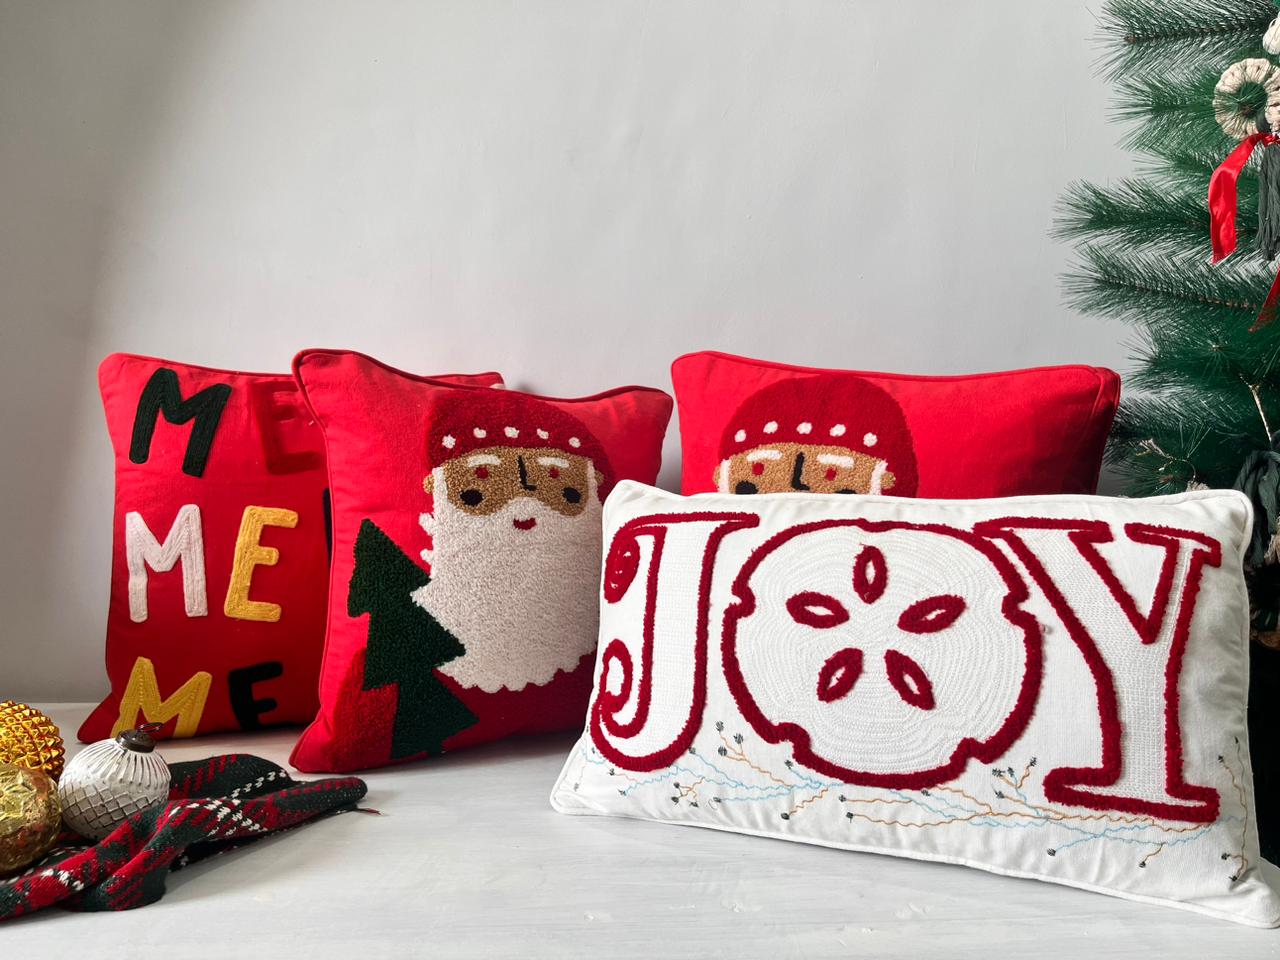 Festive Christmas Cotton Cushion Cover Set - 16x16 inch, Tufted Style (Pack of 5) with size of 40cm X 40cm (16" X 16")